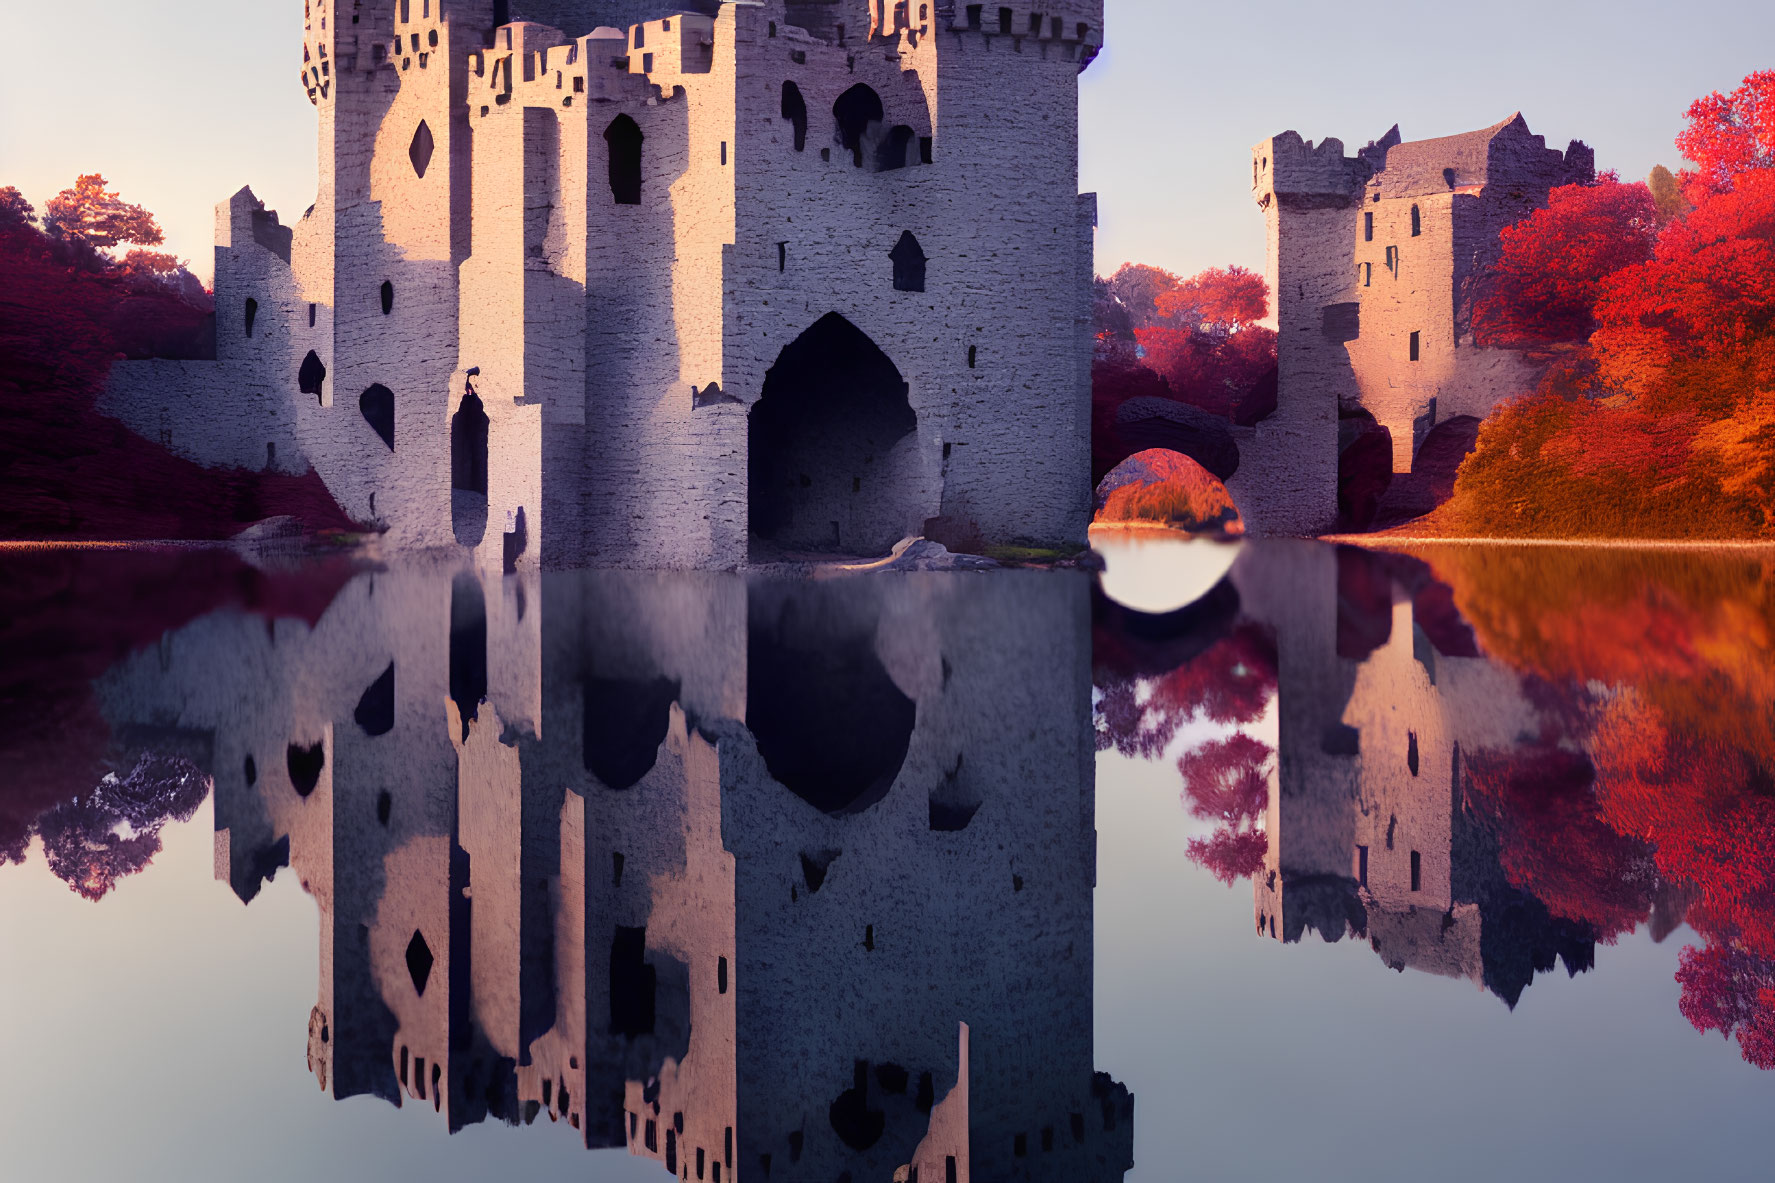 Ancient castle reflected in calm waters at twilight